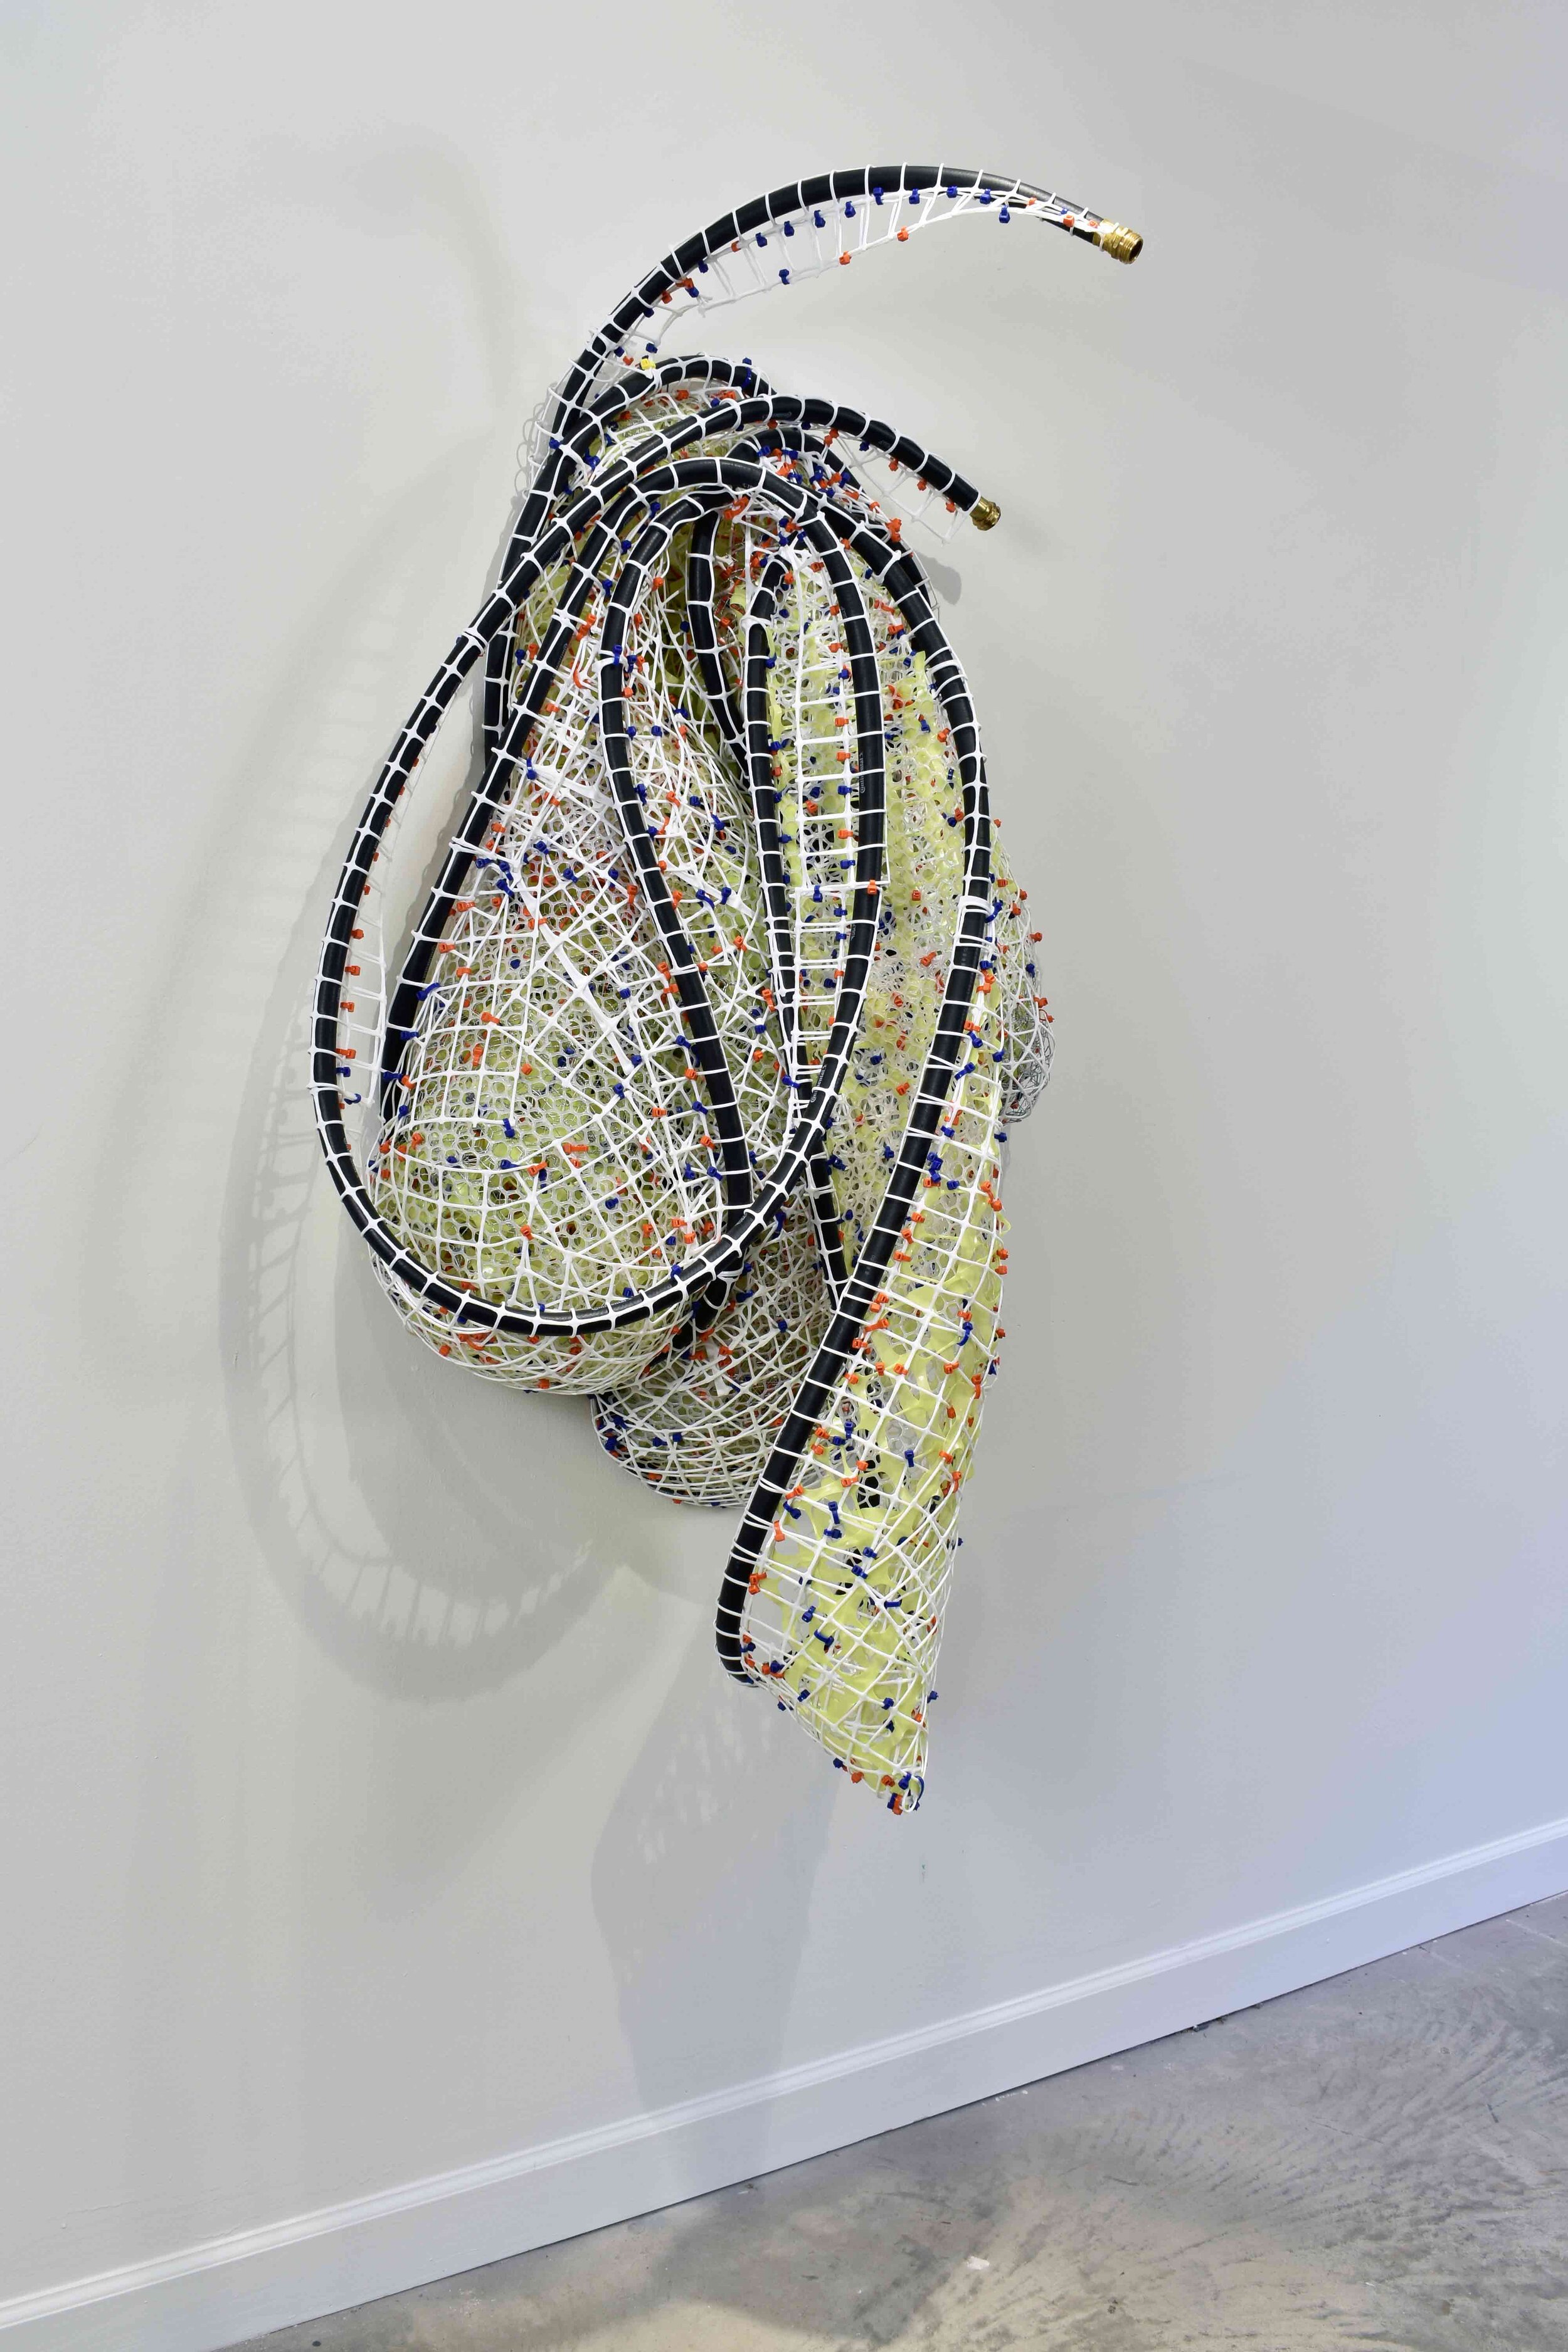   Kryptonite Hose_1   2019  plastic and metal fencing, cable ties and rubber hose  60 X 32 X 19”  Private Collection 